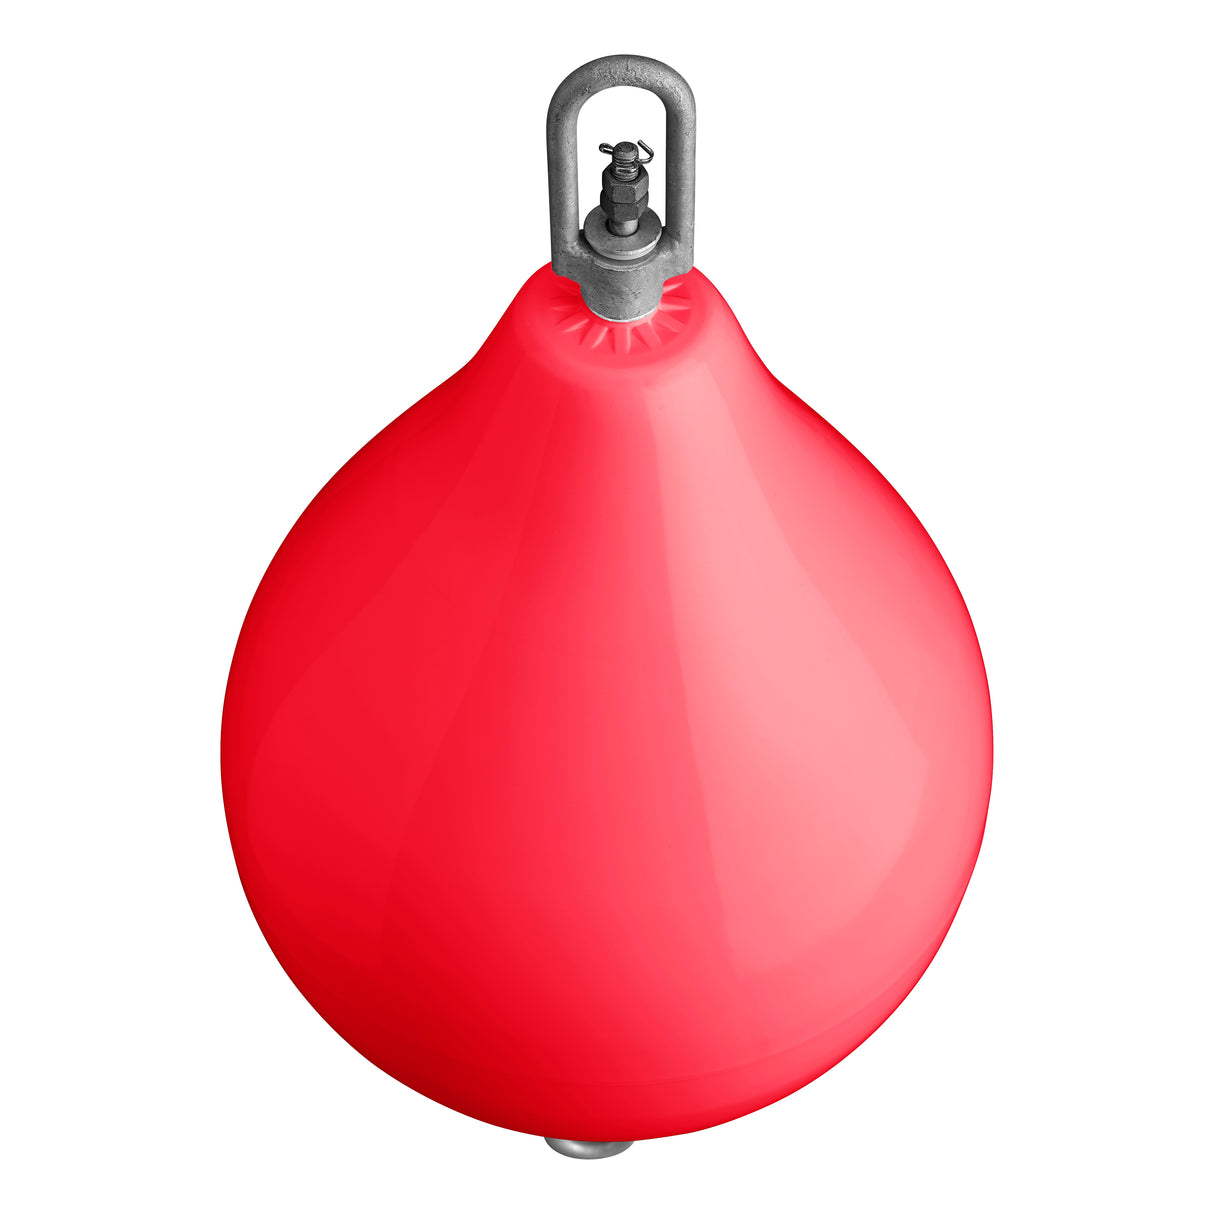 CM-3 Mooring Buoy with galvanized steel mooring iron and shackle, red